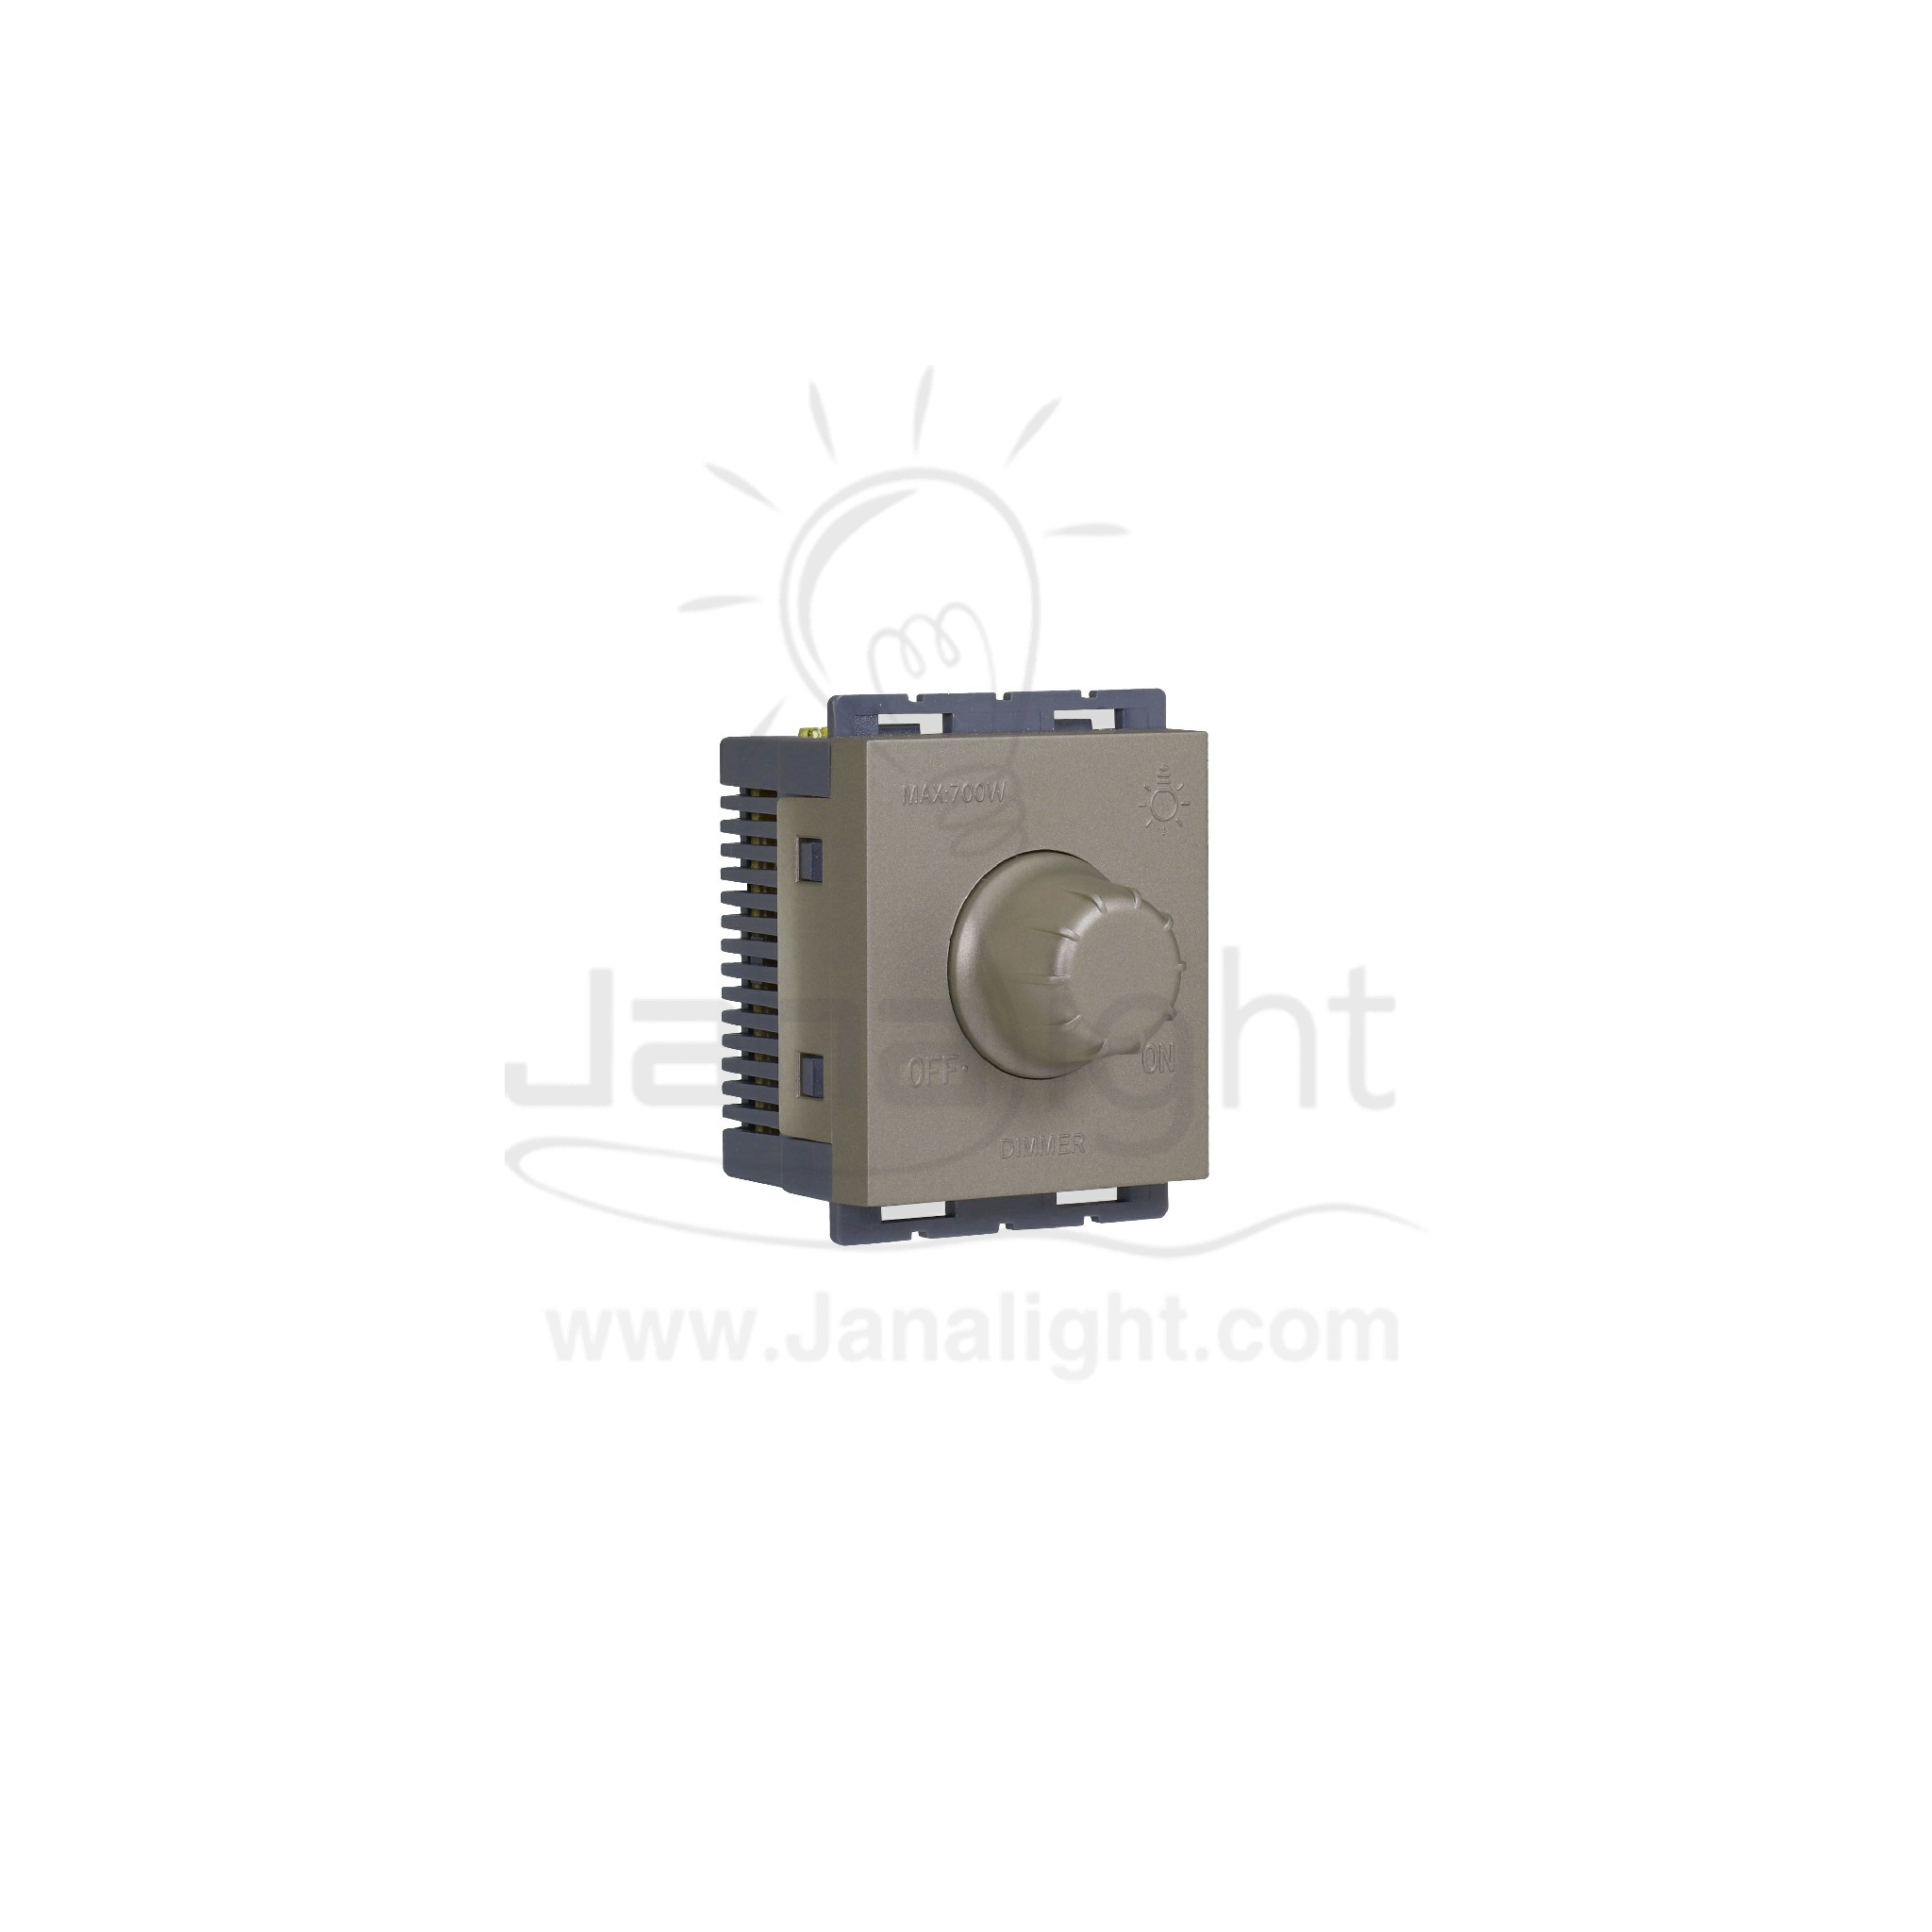 OSA دايمر انارة 700 وات بني osa Socket Dimmers 700w For Lighting brown